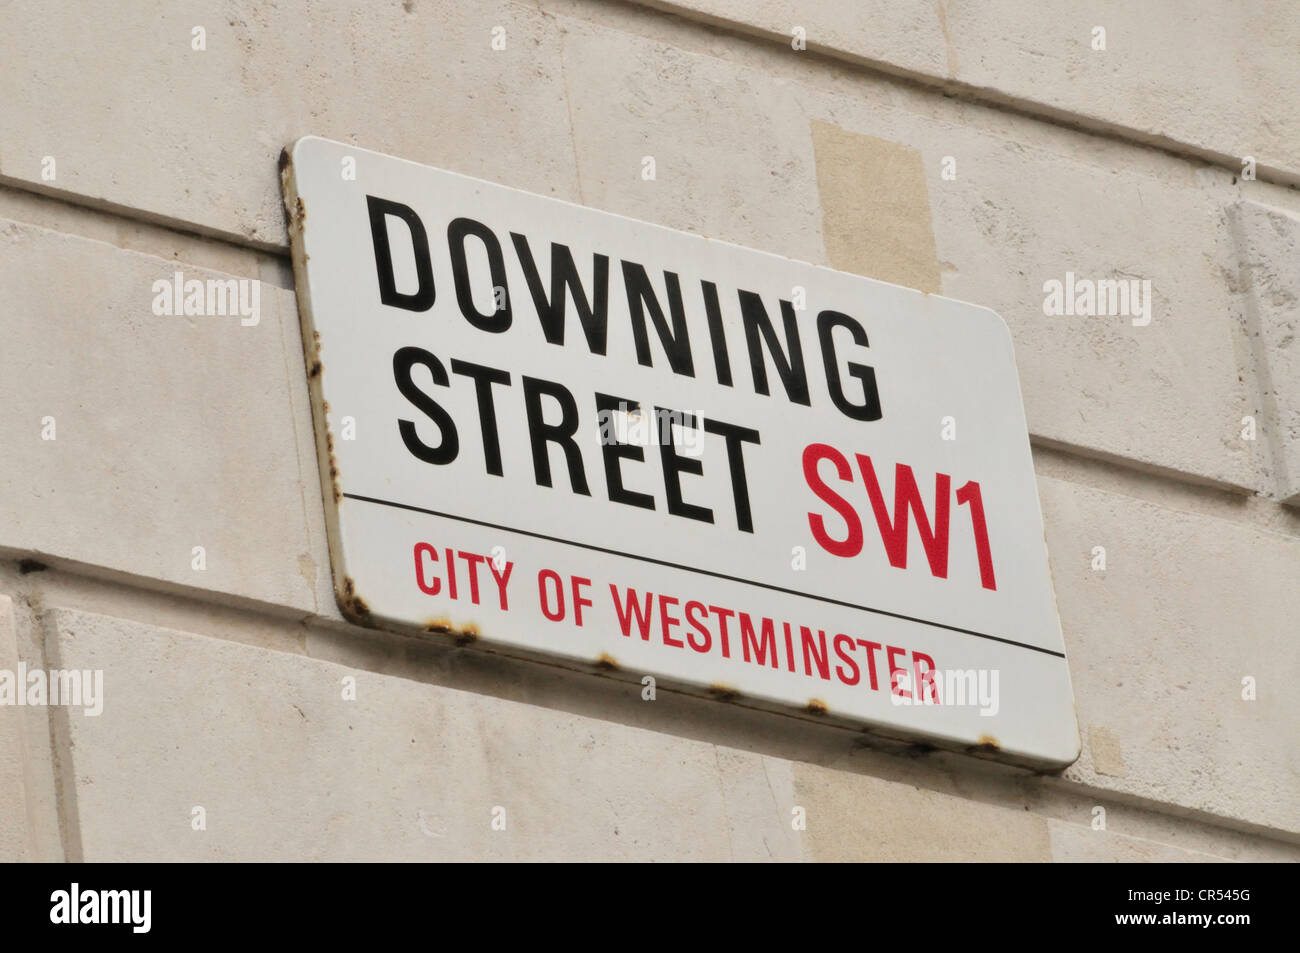 Street sign, Downing Street, Government District, London, England, Great Britain, United Kingdom, Europe Stock Photo